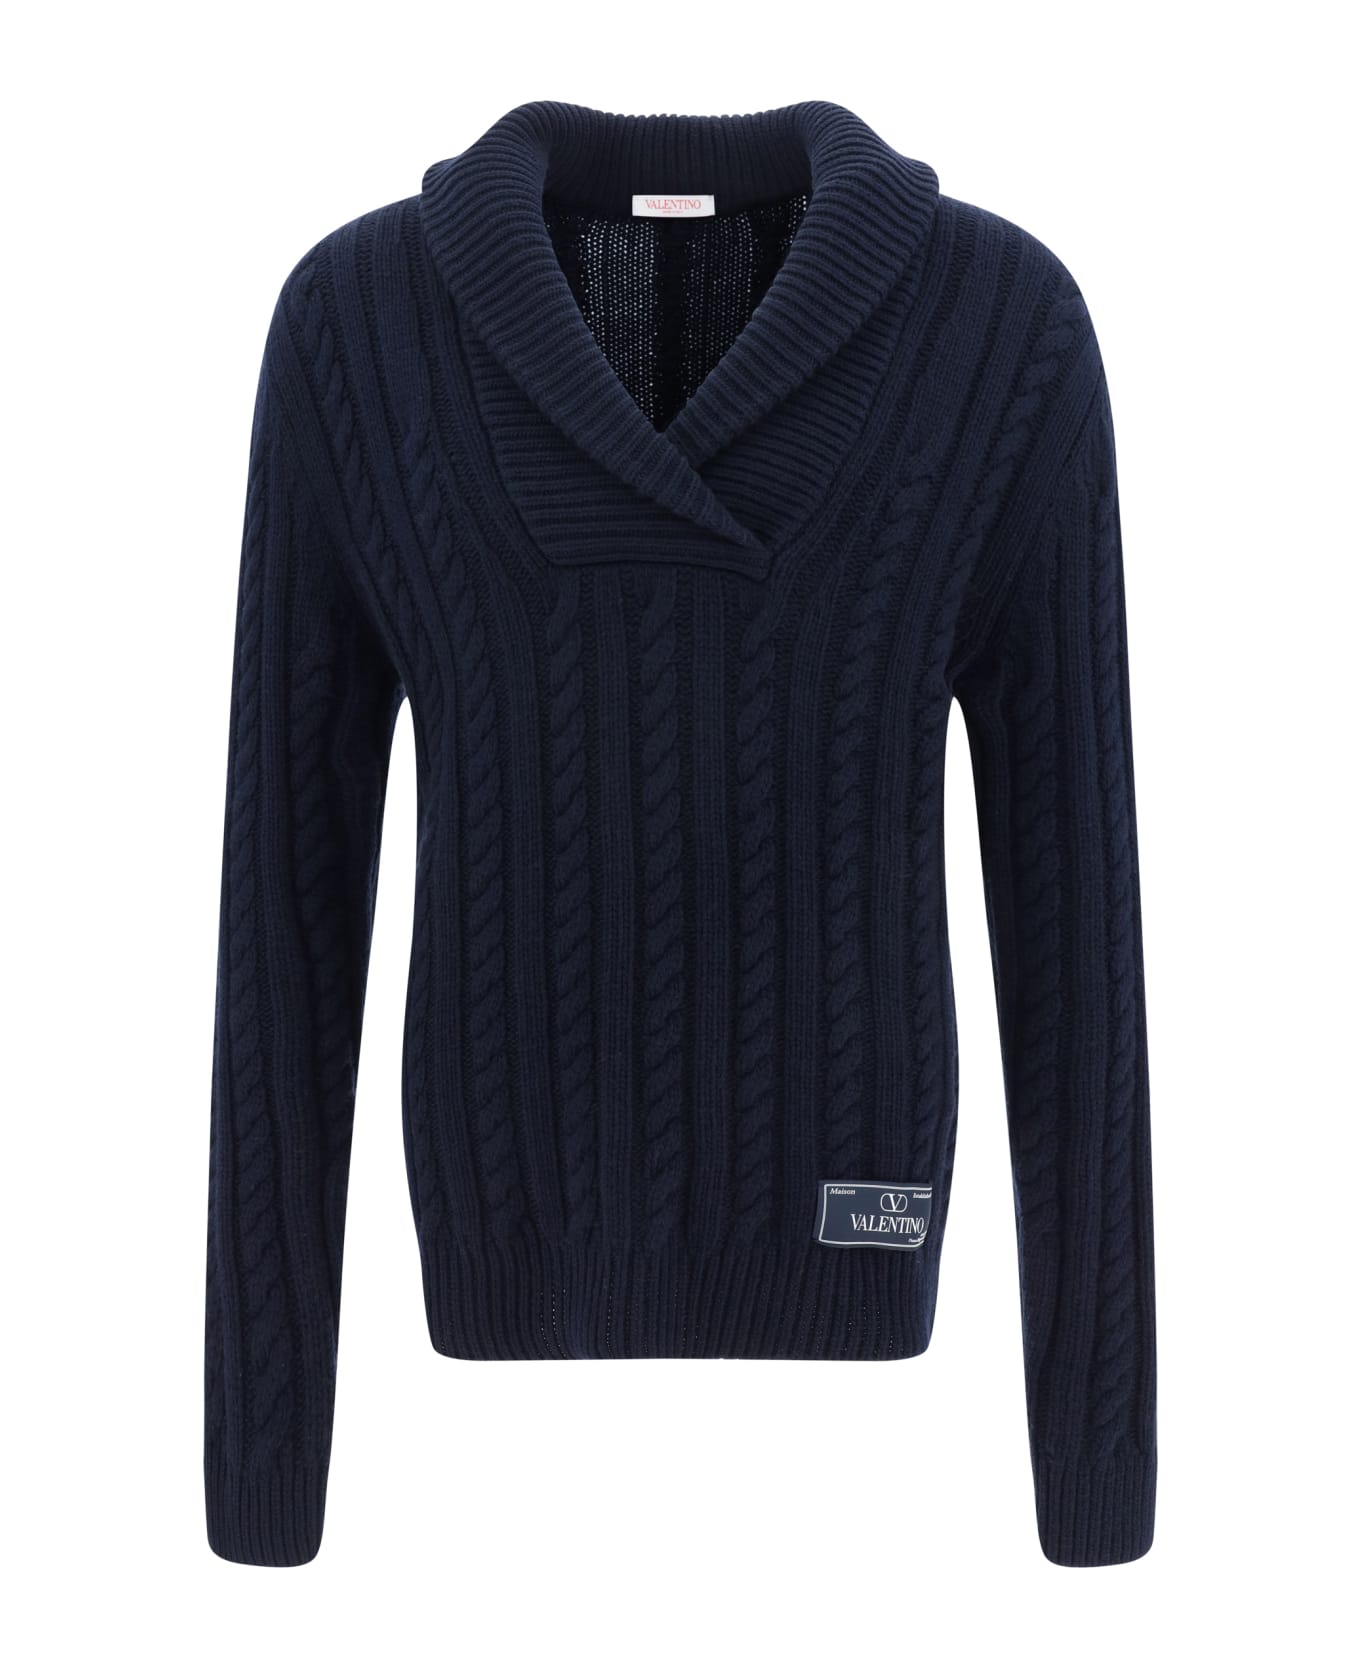 Valentino Cable Knit Sweater - Navy